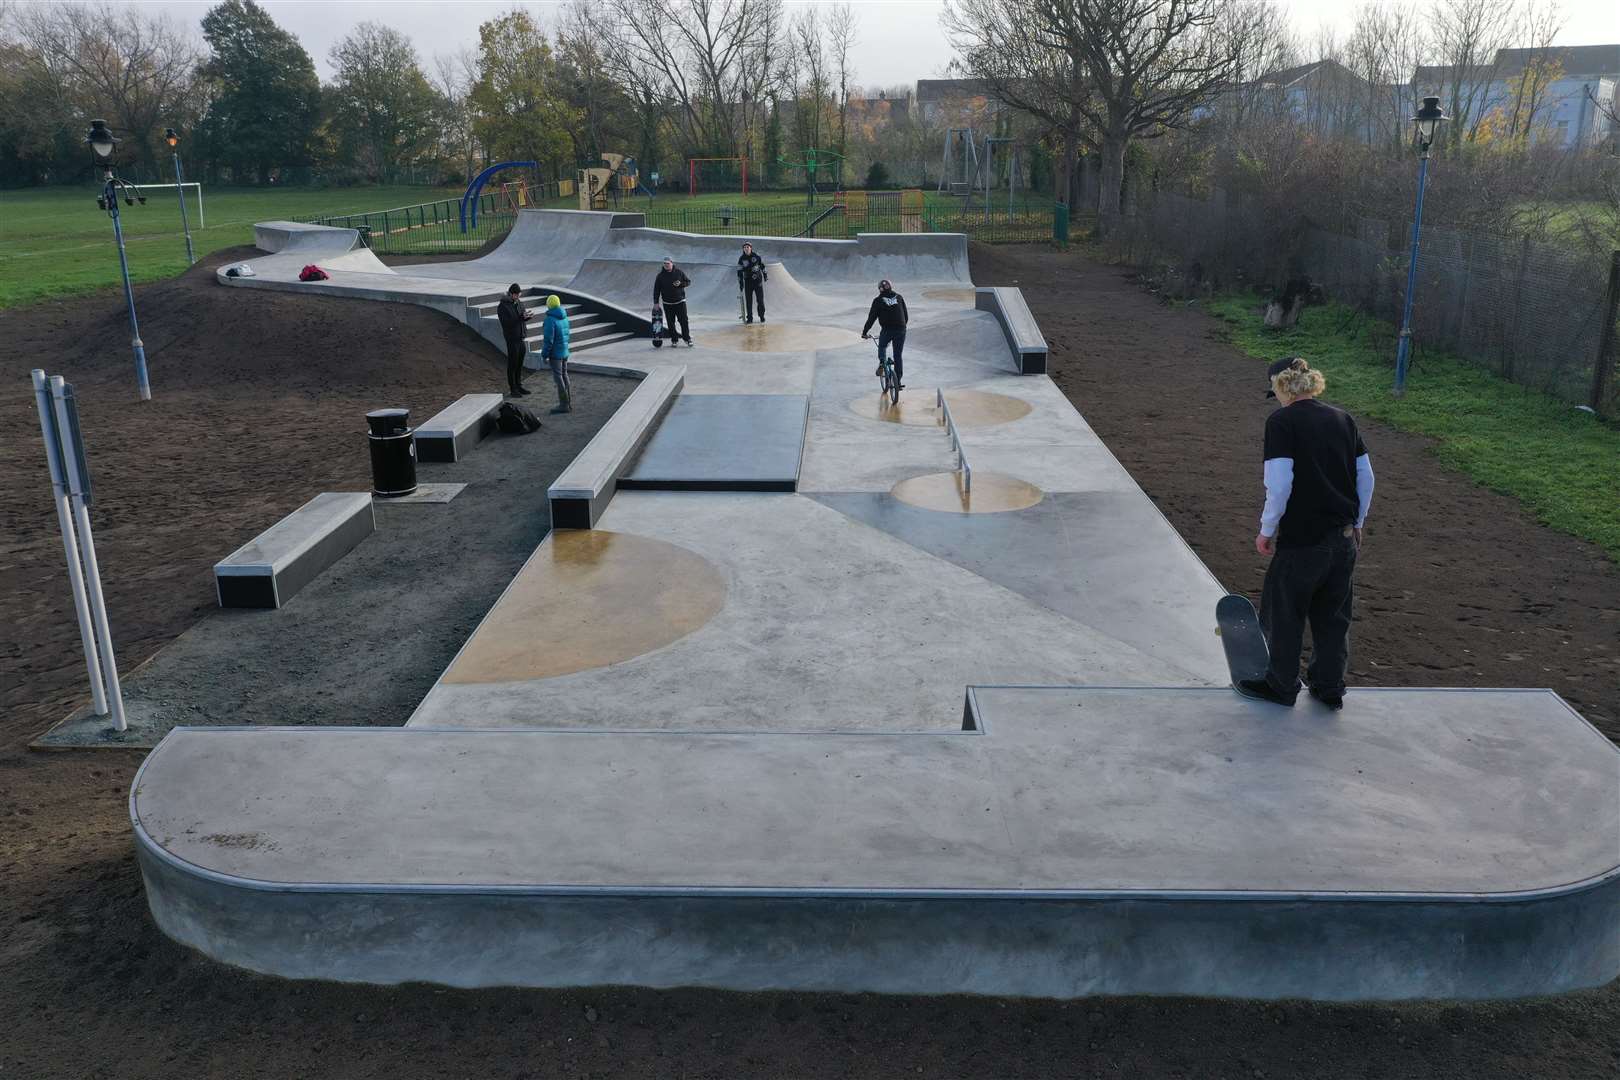 The new skate park has been designed for skaters, BMX riders and scooter riders alike. Photo: Maverick Skatepark